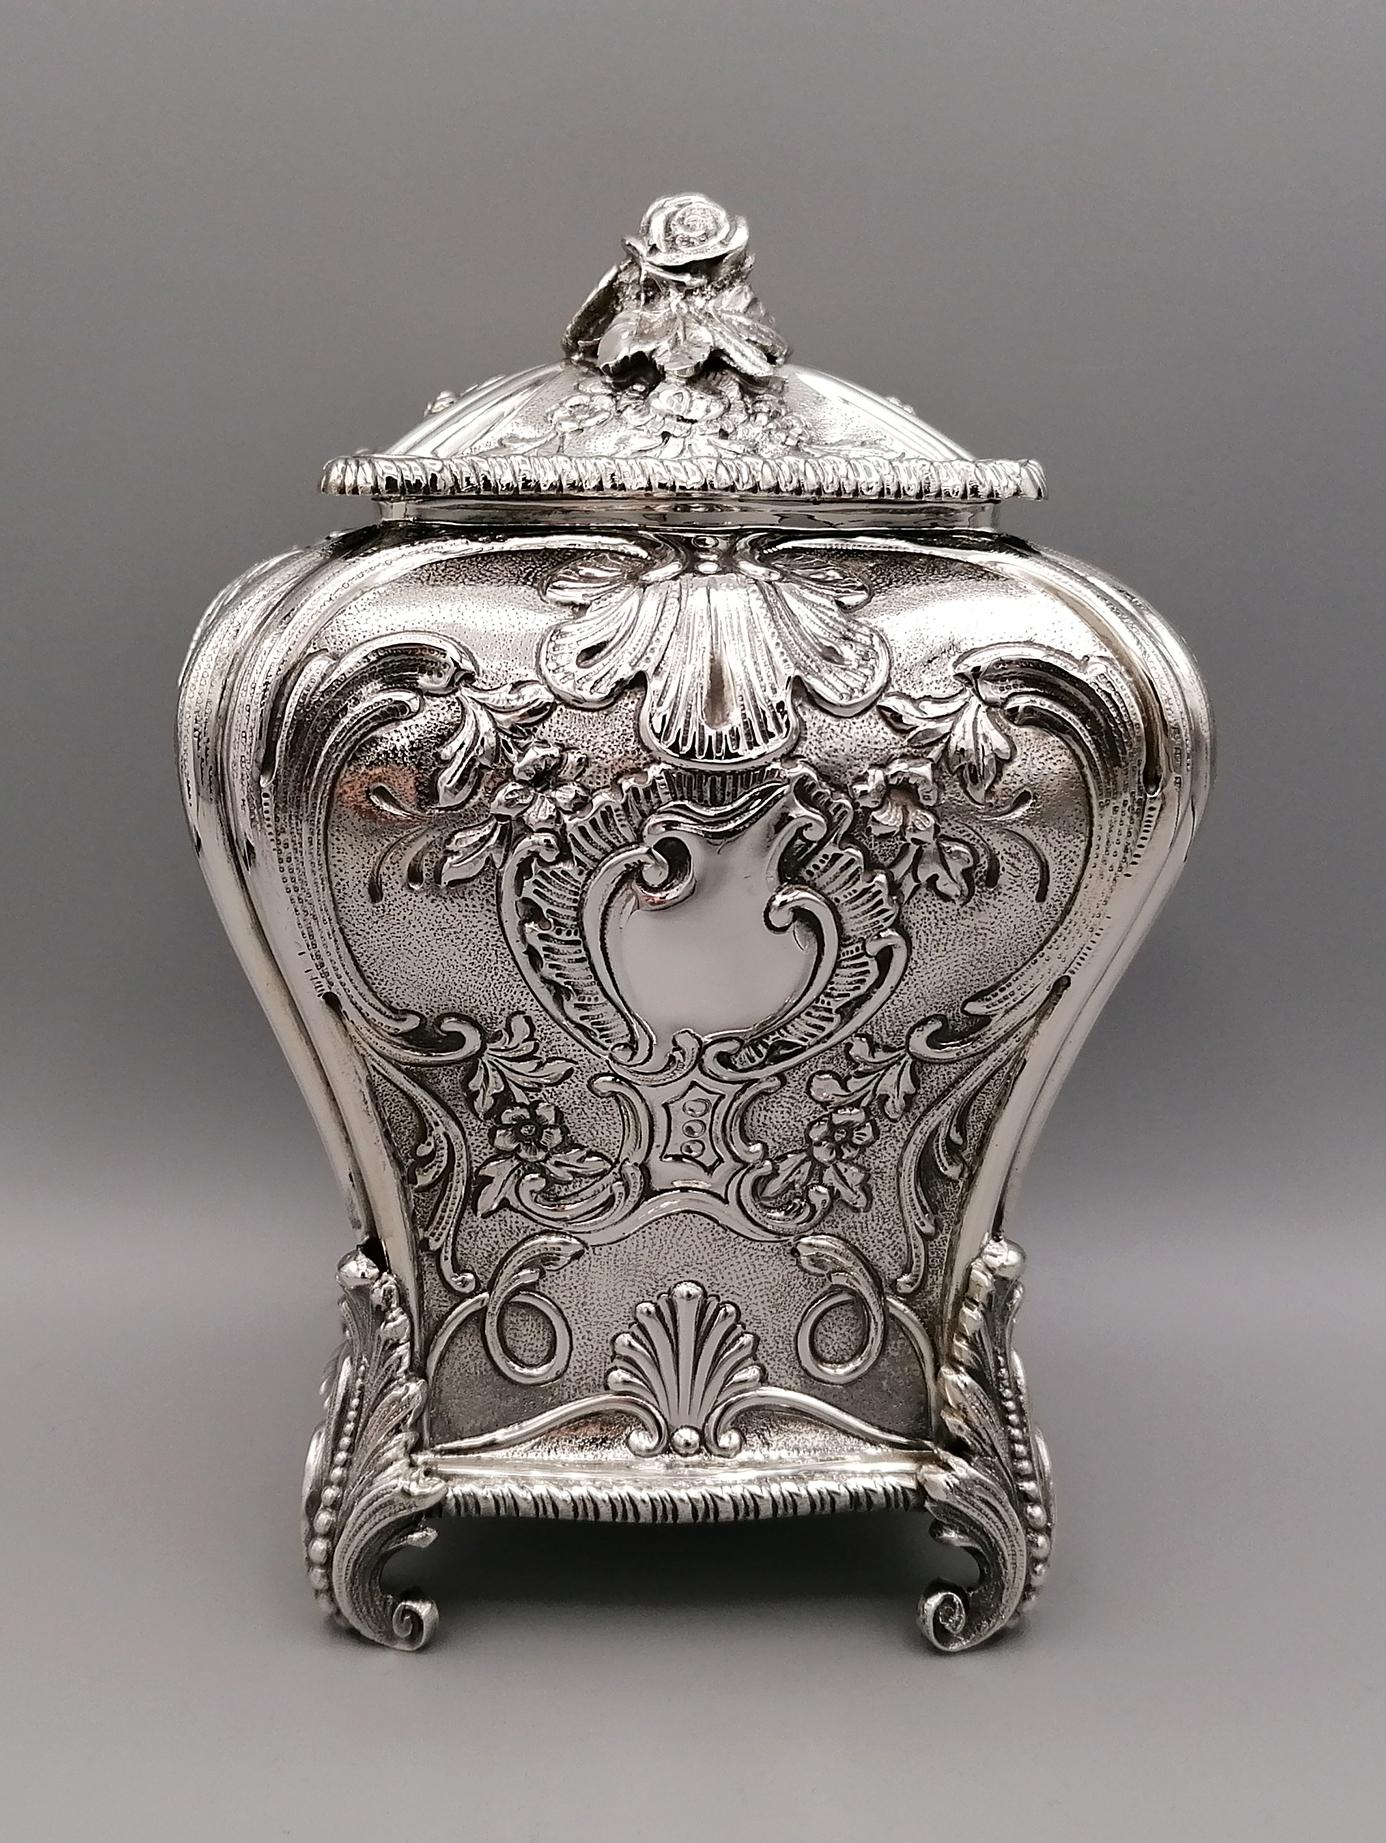 George III tea caddy replica. 
Obtained from a silver sheet, it is rectangular in shape with shaped sides, it is embossed and chiseled with floral motifs and shells. The feet reproduce acanthus leaves. The lid has a knob made with the fusion